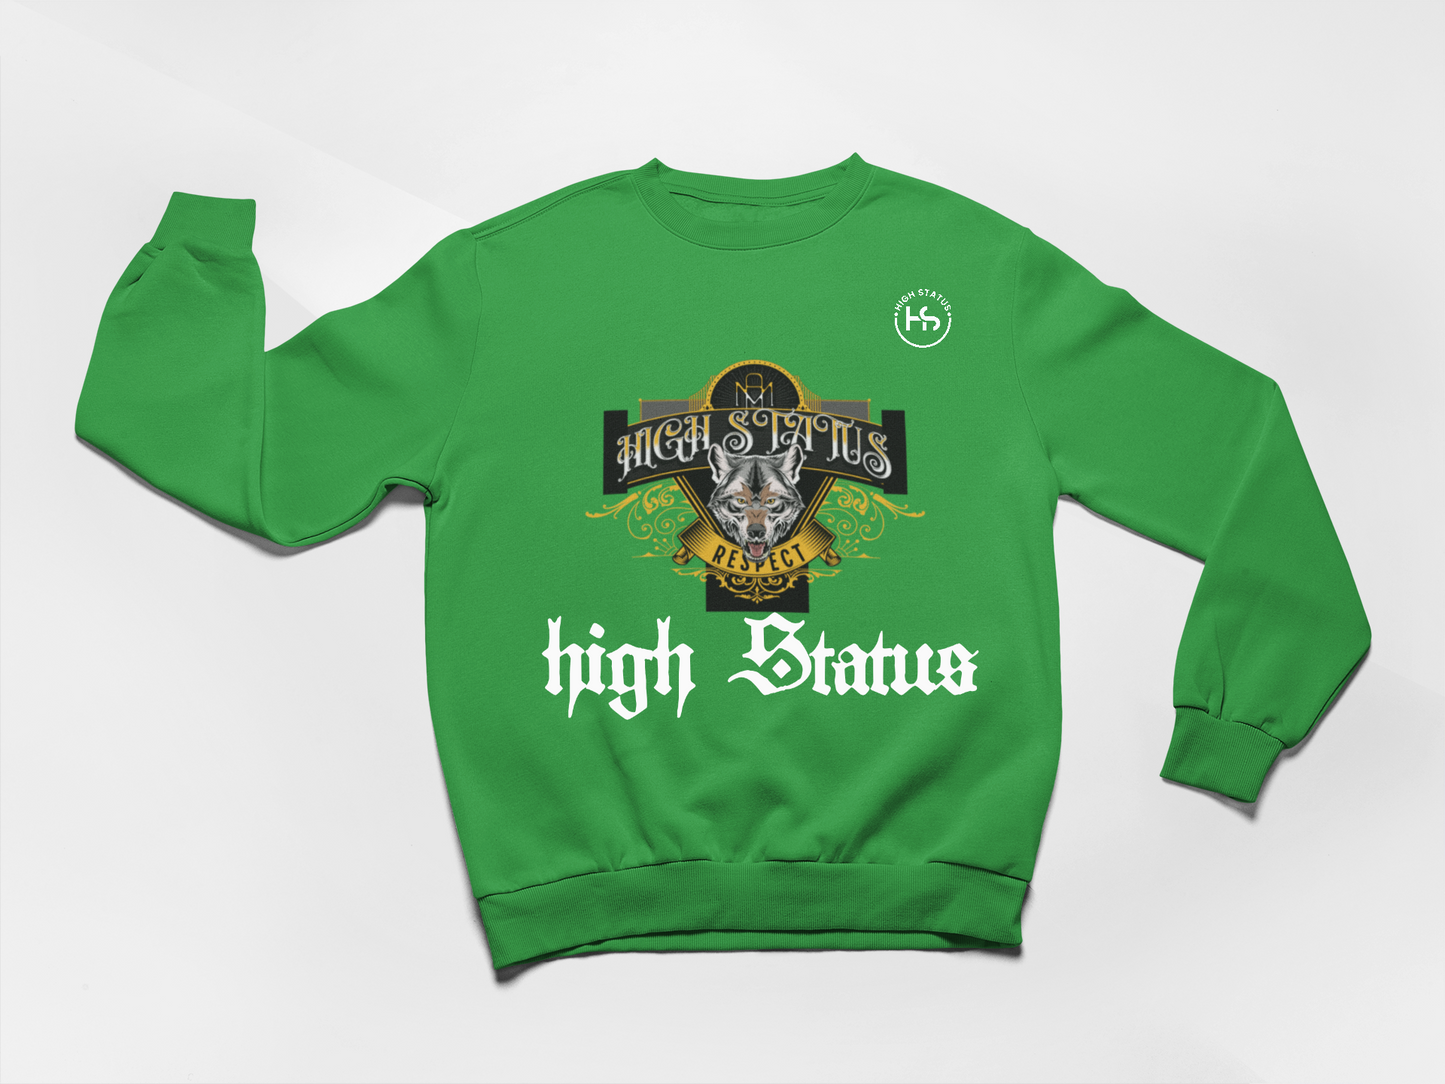 HIGH STATUS "RESPECT" LIME GREEN SWEATER